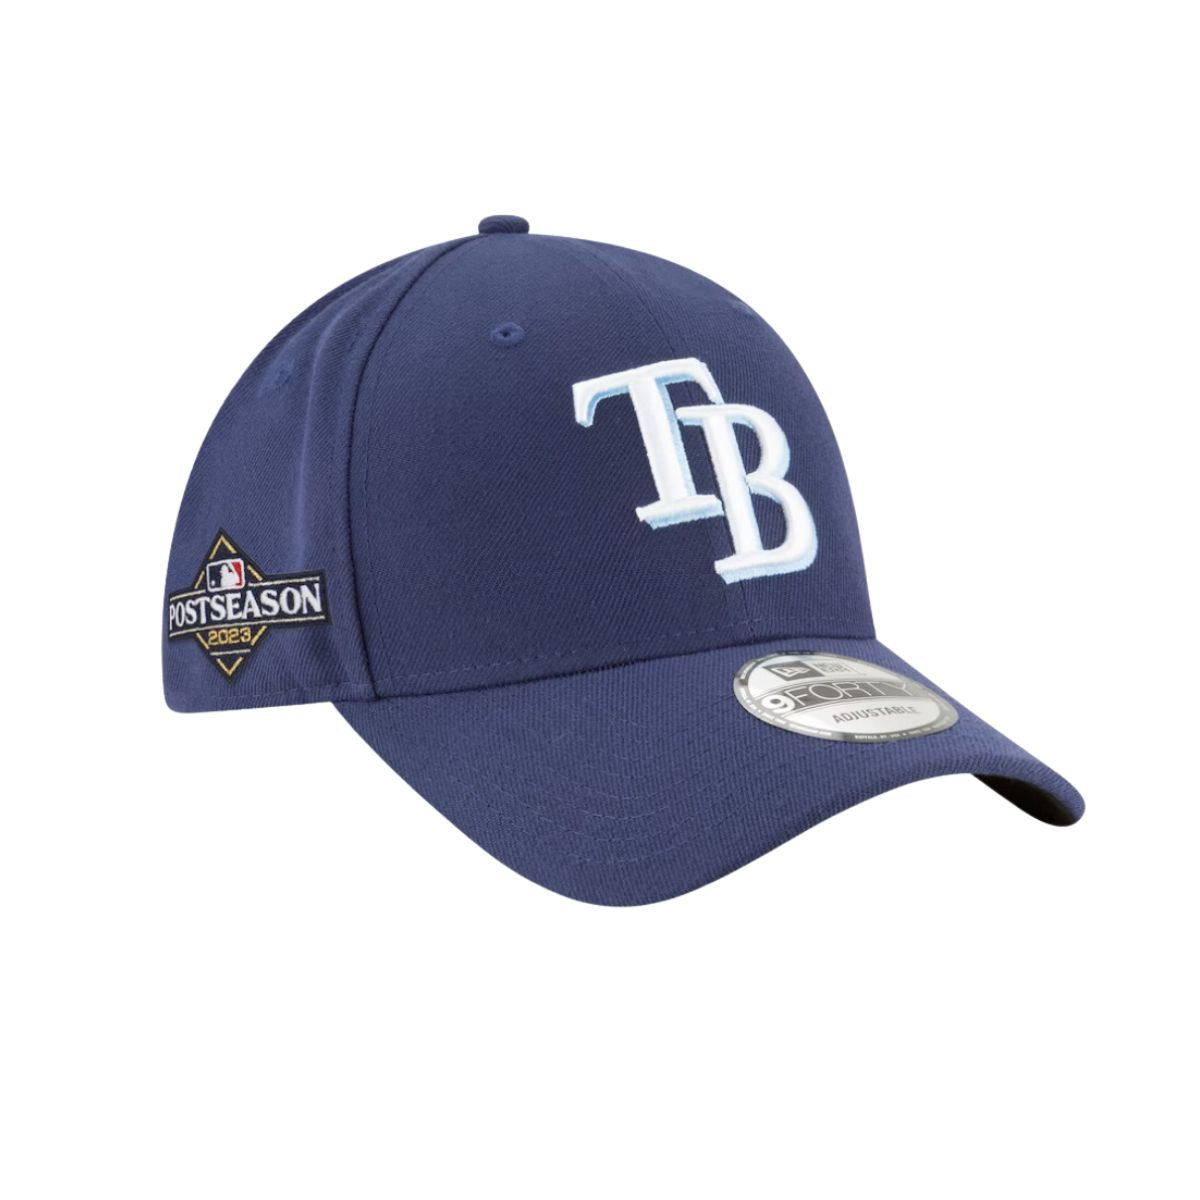 Tampa Bay Rays Nike 2023 Postseason Authentic Collection Dugout